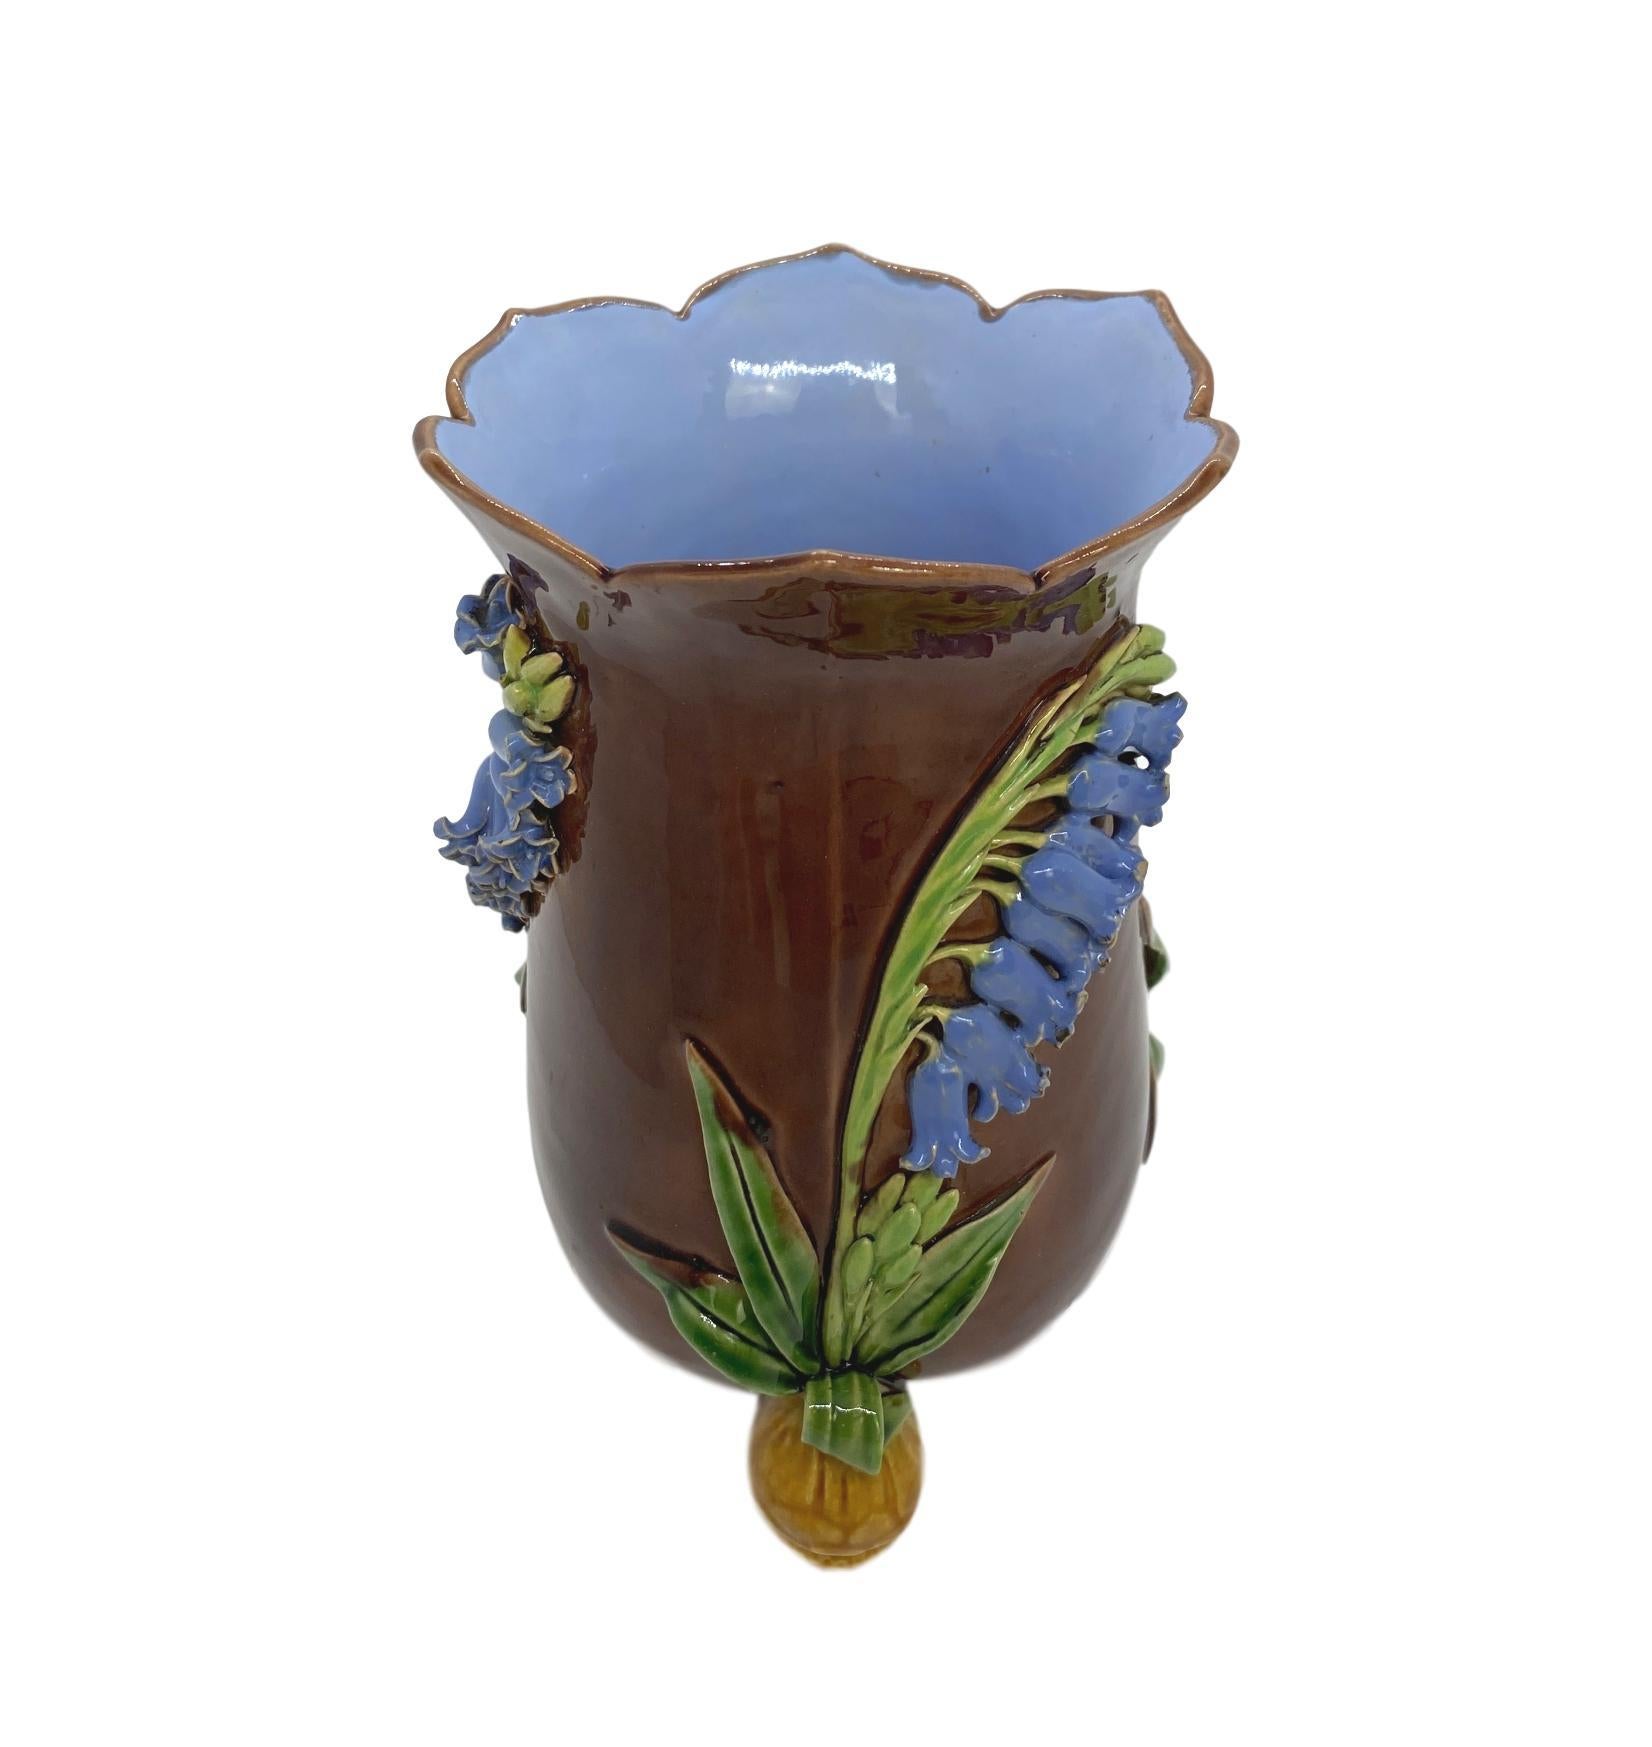 Victorian Minton Majolica Bluebells Vase in Periwinkle Blue, English, Dated 1853